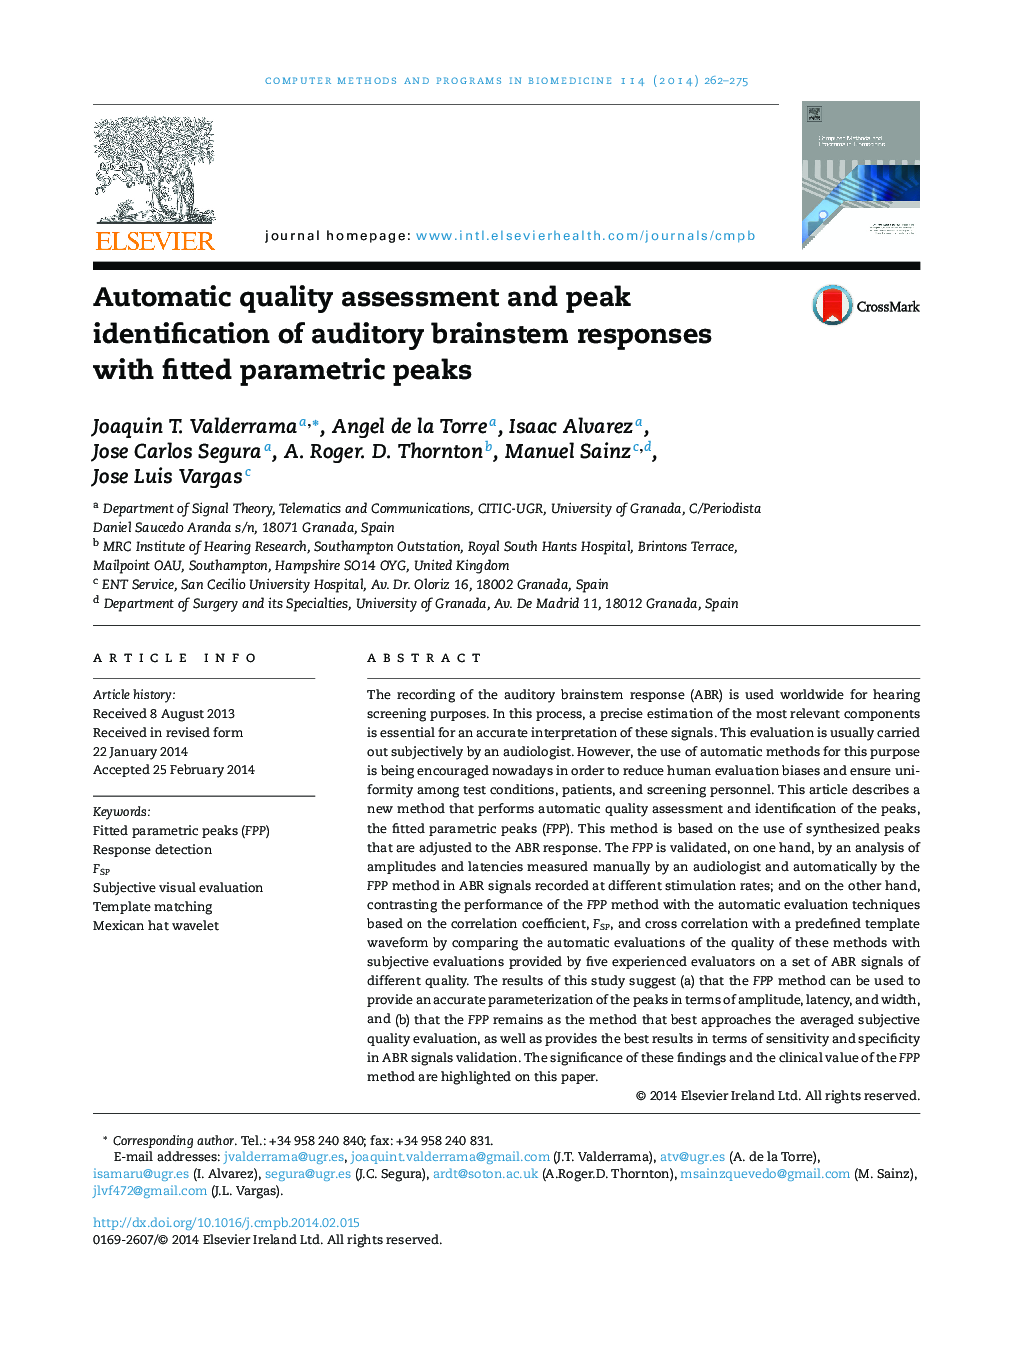 Automatic quality assessment and peak identification of auditory brainstem responses with fitted parametric peaks